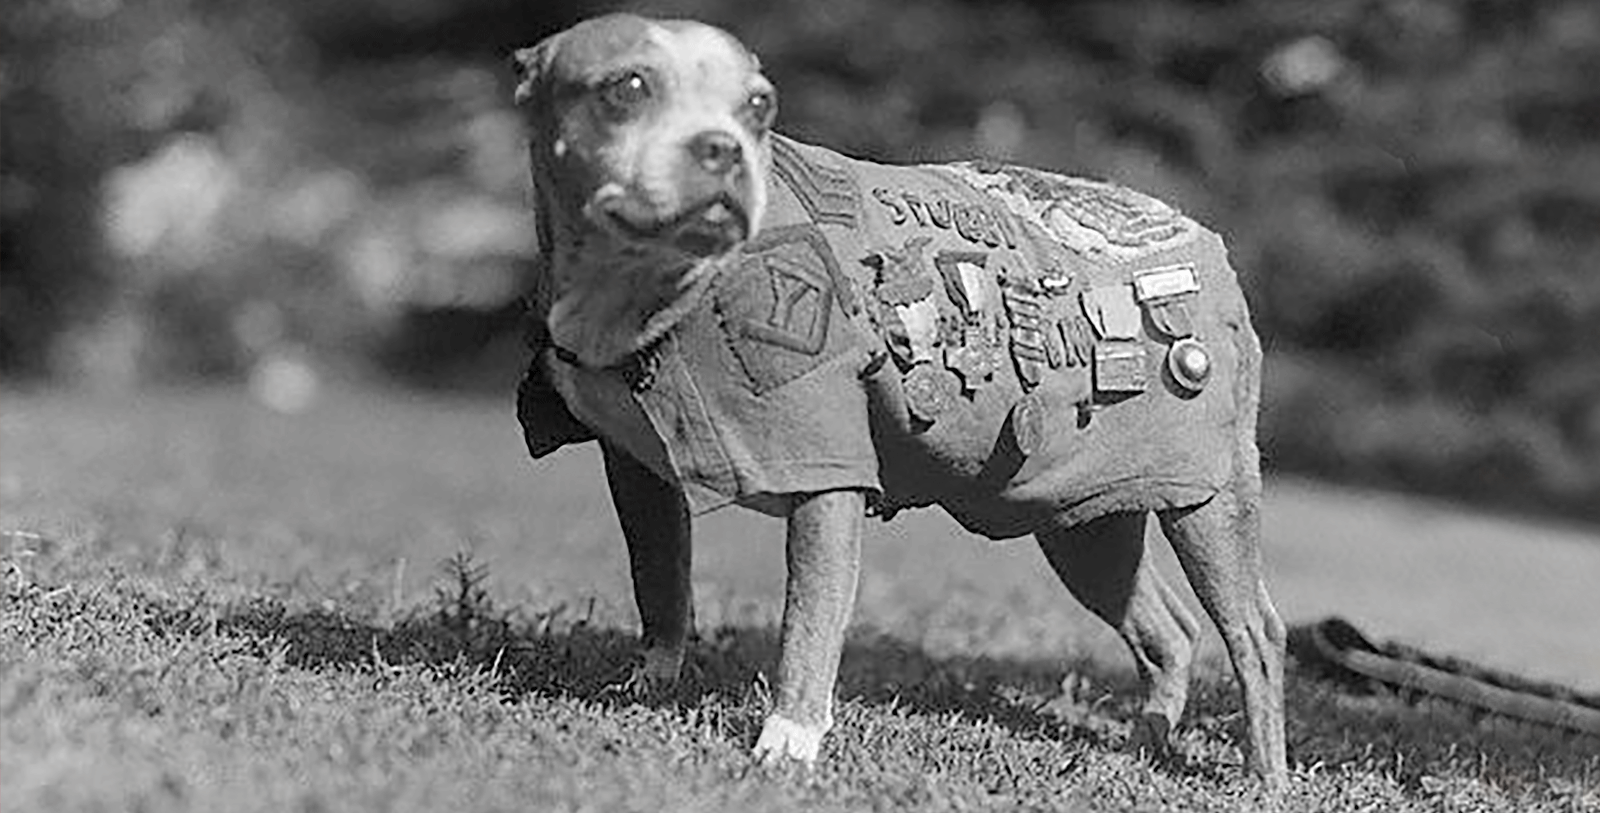 Stubby the dog is one of the stories that can make WW1 more memorable for students